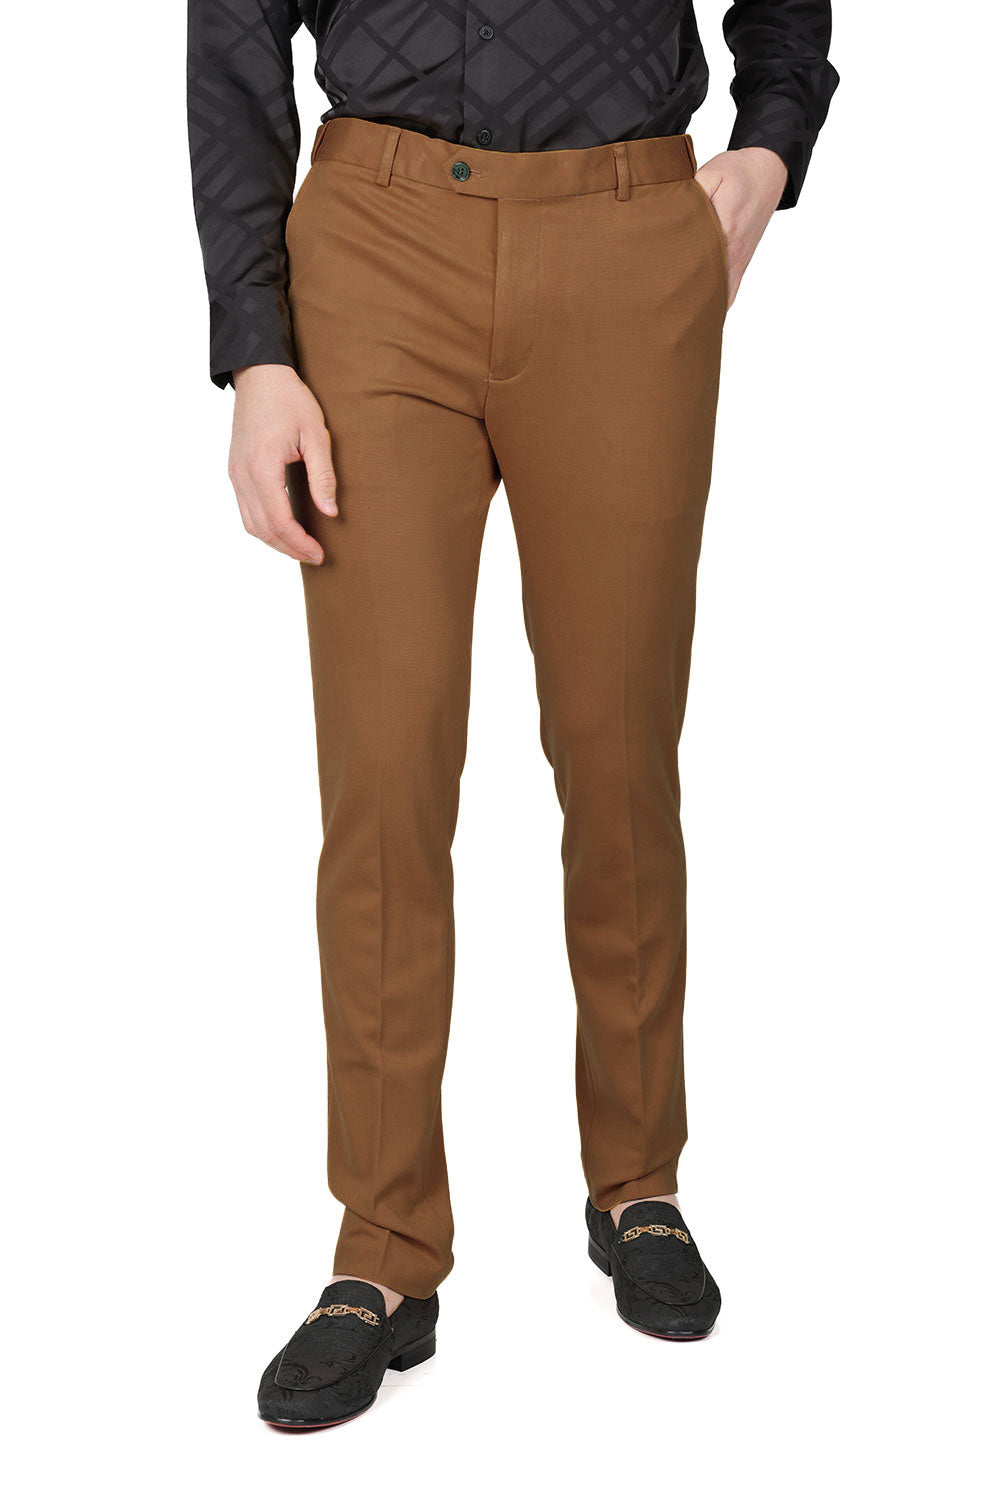 Barabas Men's Solid Color Basic Essential Chino Dress Pants CP4007 Camel